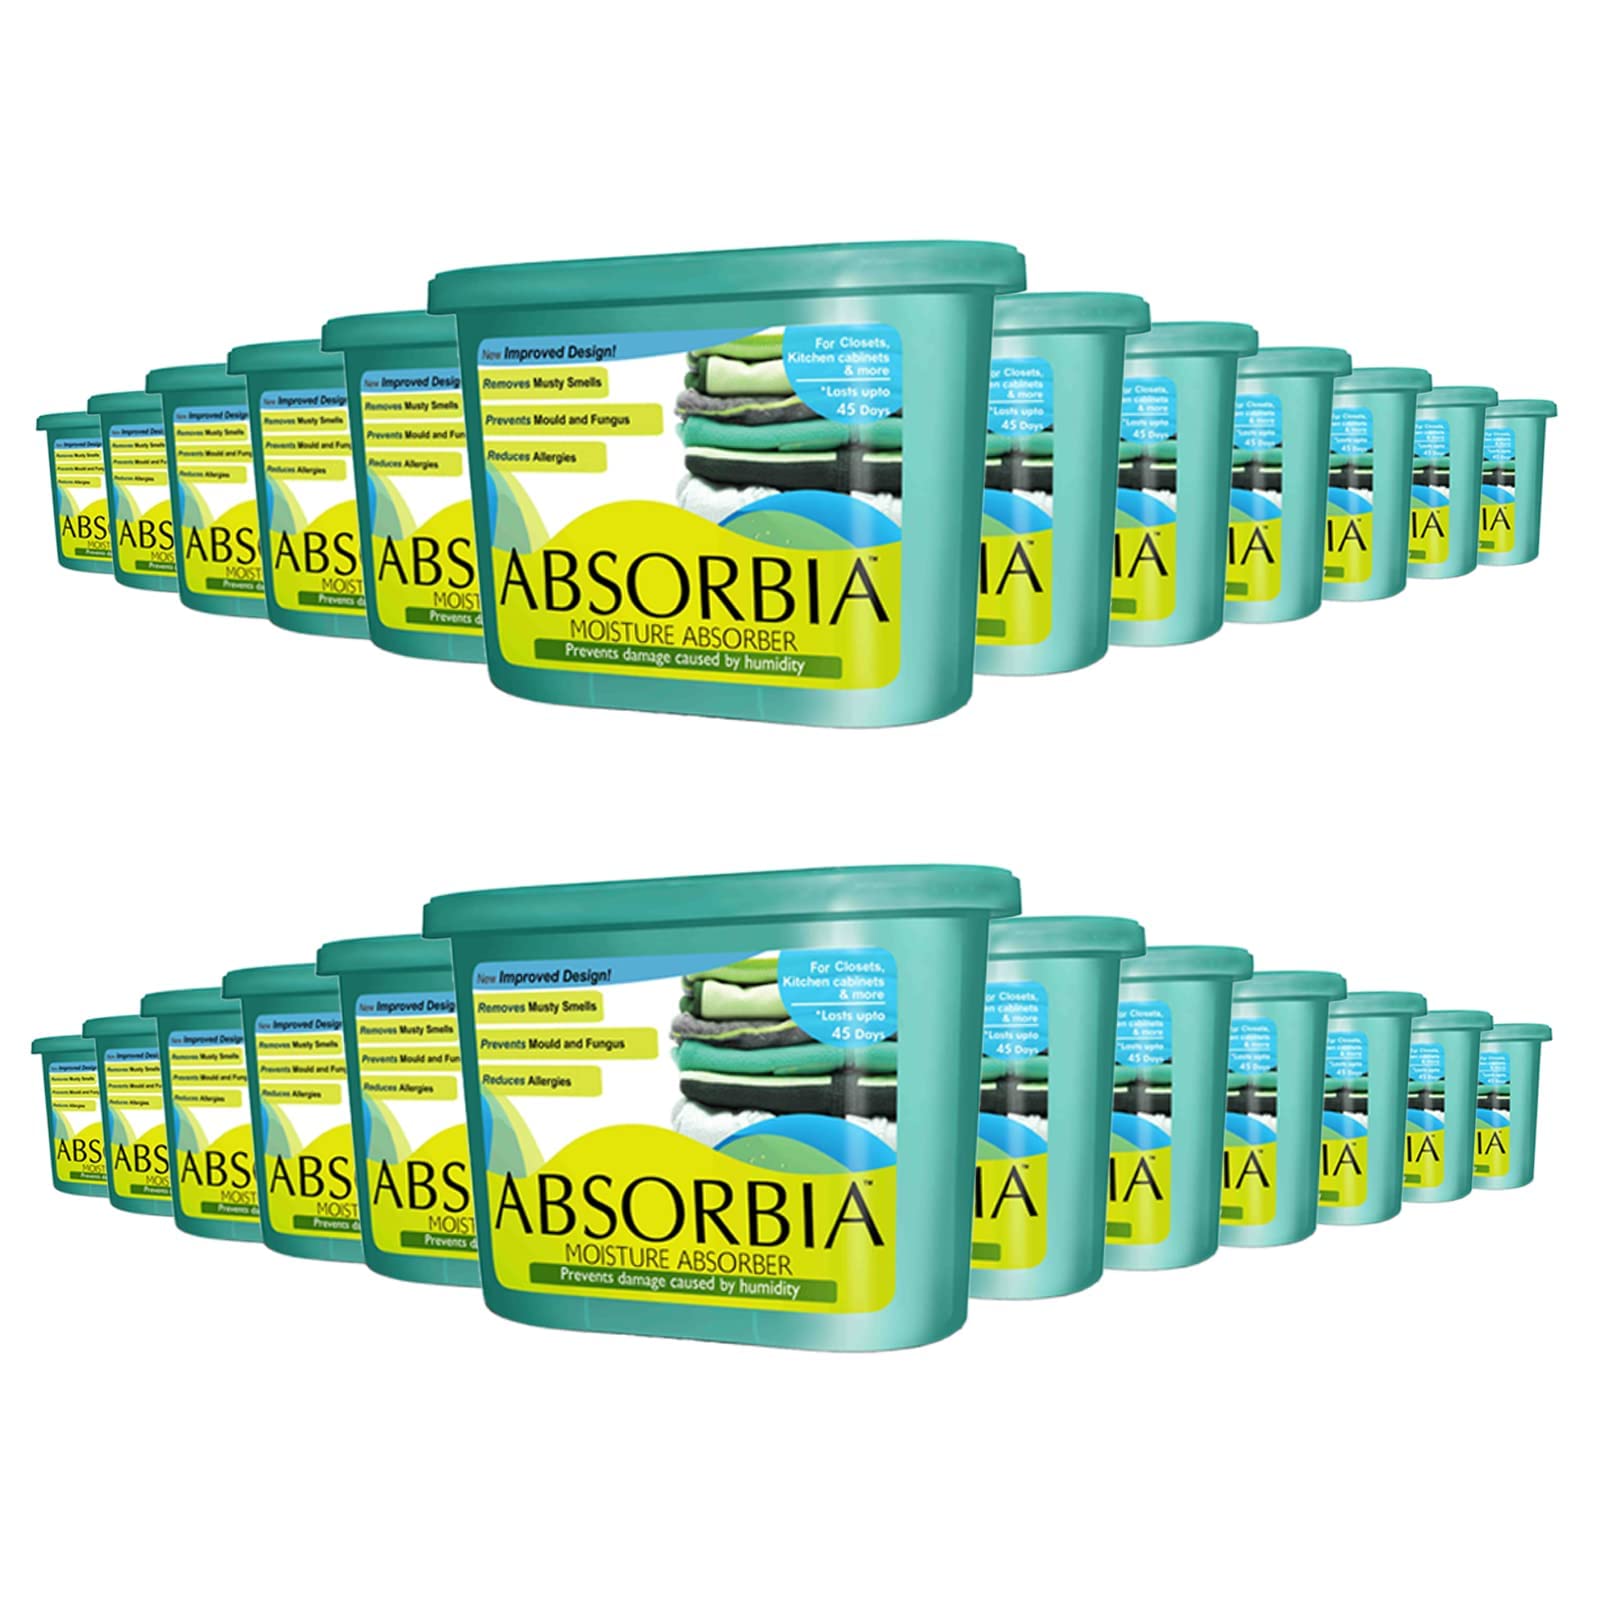 Absorbia classic Variant (300g x 48)